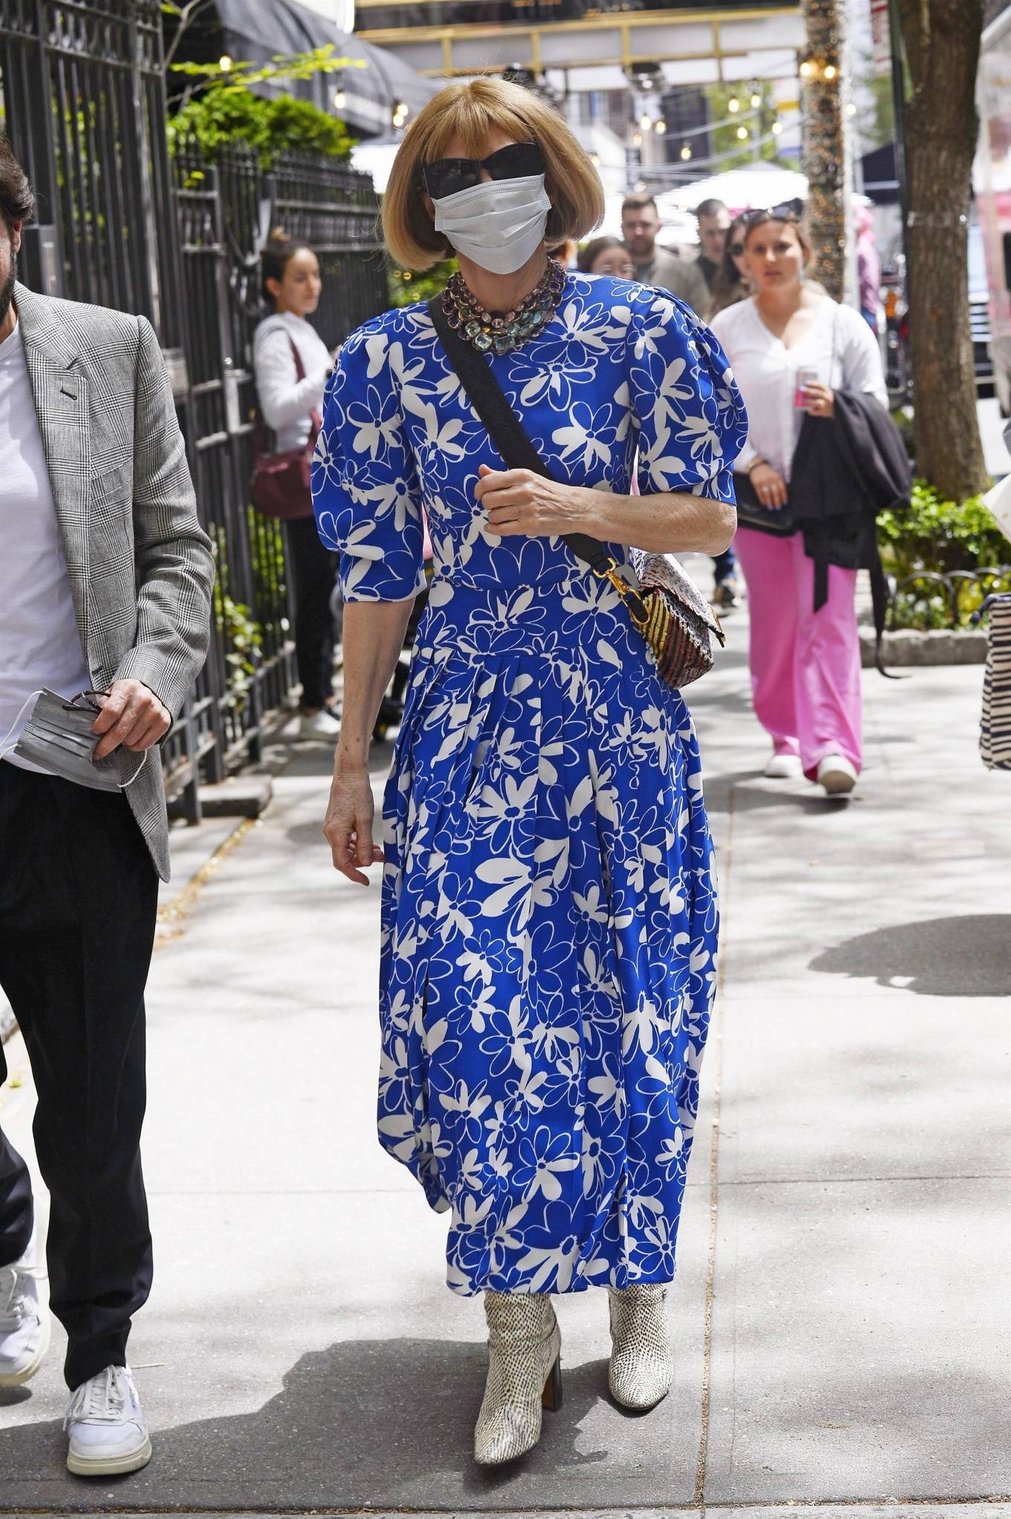 Anna Wintour - In a summer blue dress exits the Mark Hotel in New York